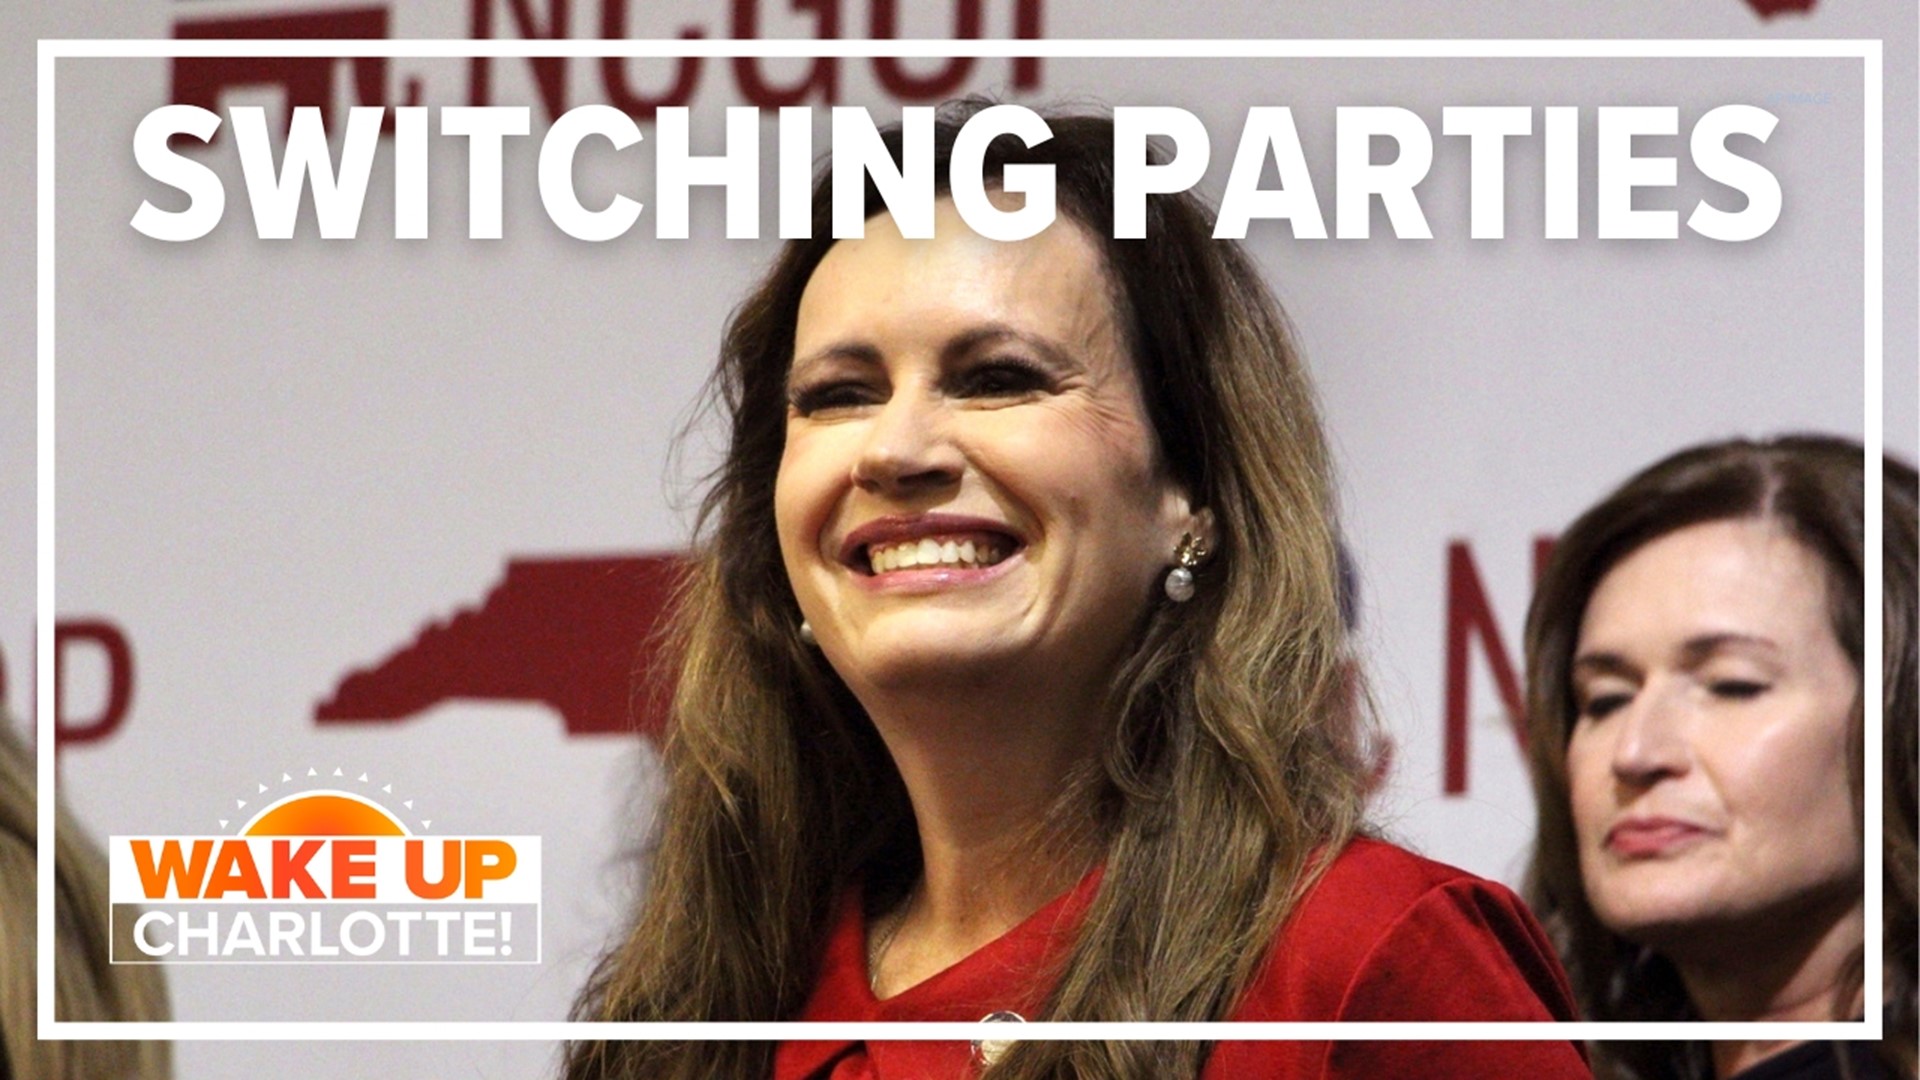 She campaigned and won in 2022 as a Democrat. Now, Cotham has switched to the Republican party.